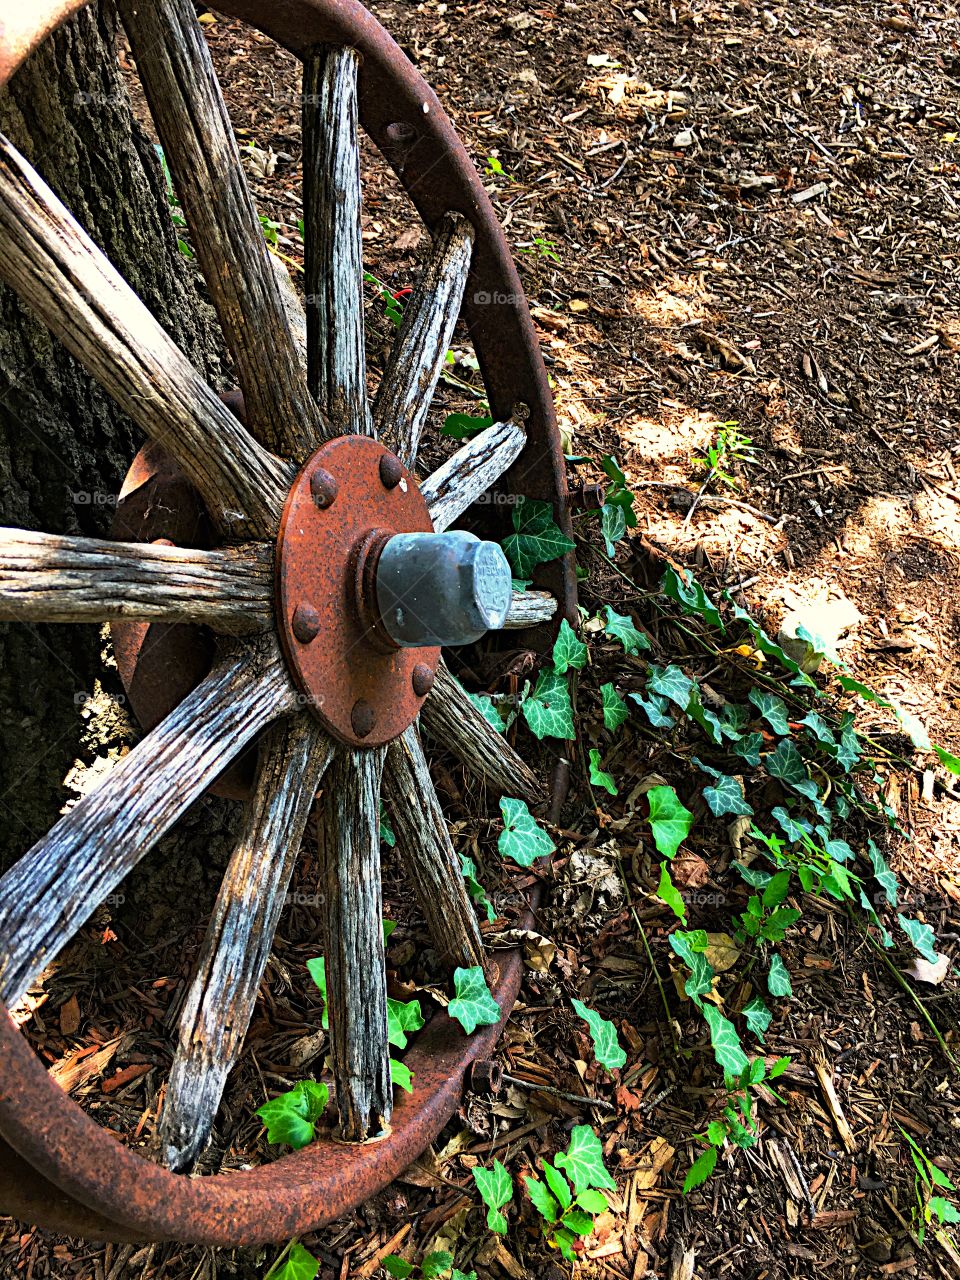 Antique wooden spoke wheel with rusted metal makes your imagination wander to days gone by